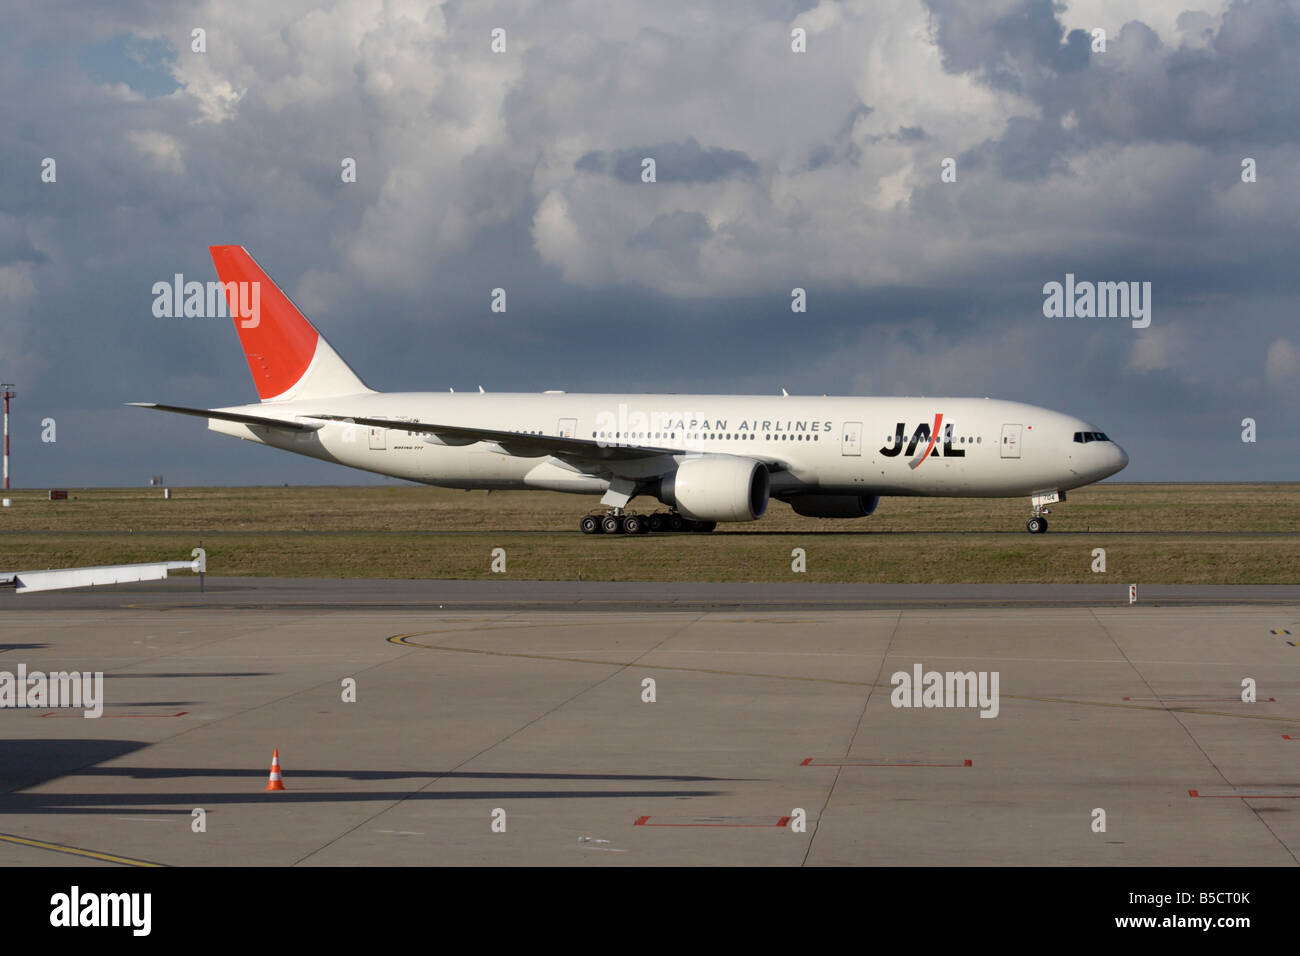 Japan Airlines Boeing 777-200ER on arrival at Paris Charles de Gaulle Airport Stock Photo